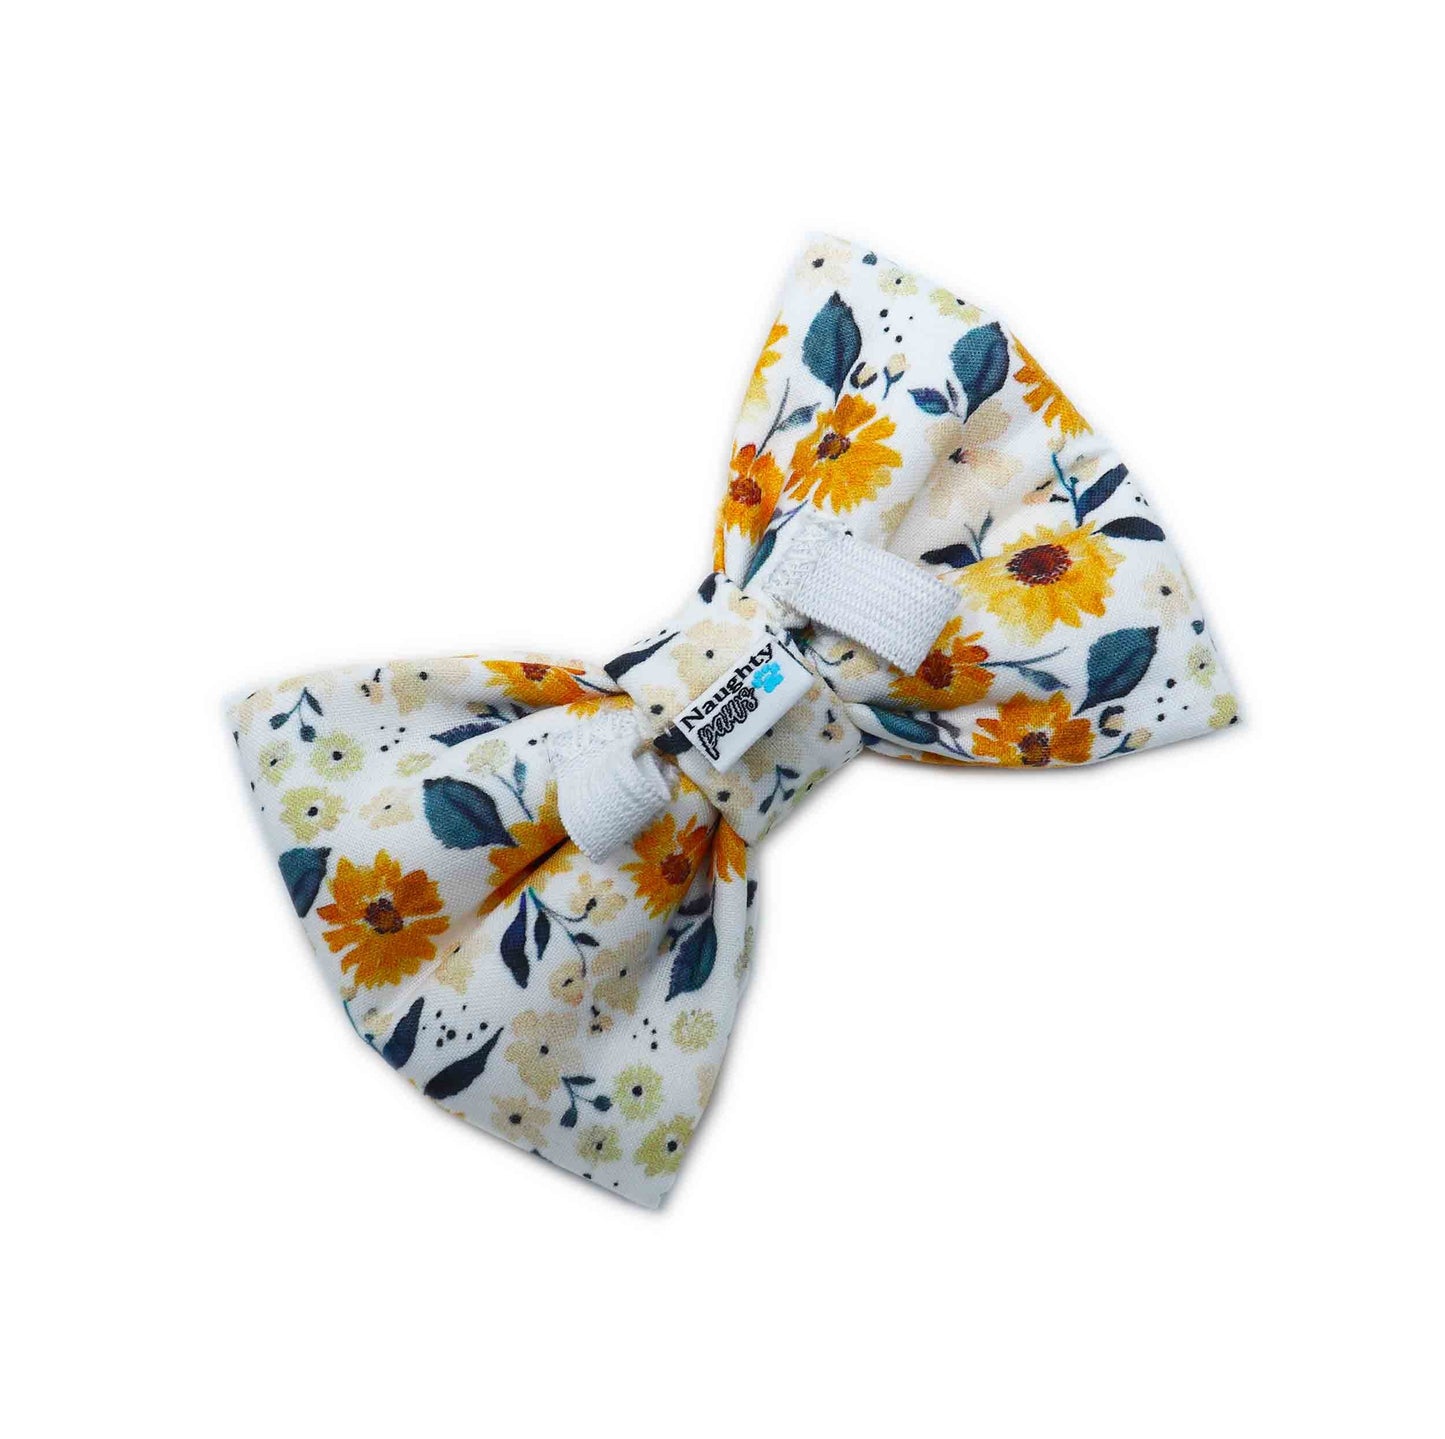 "Summertime" Bow Tie